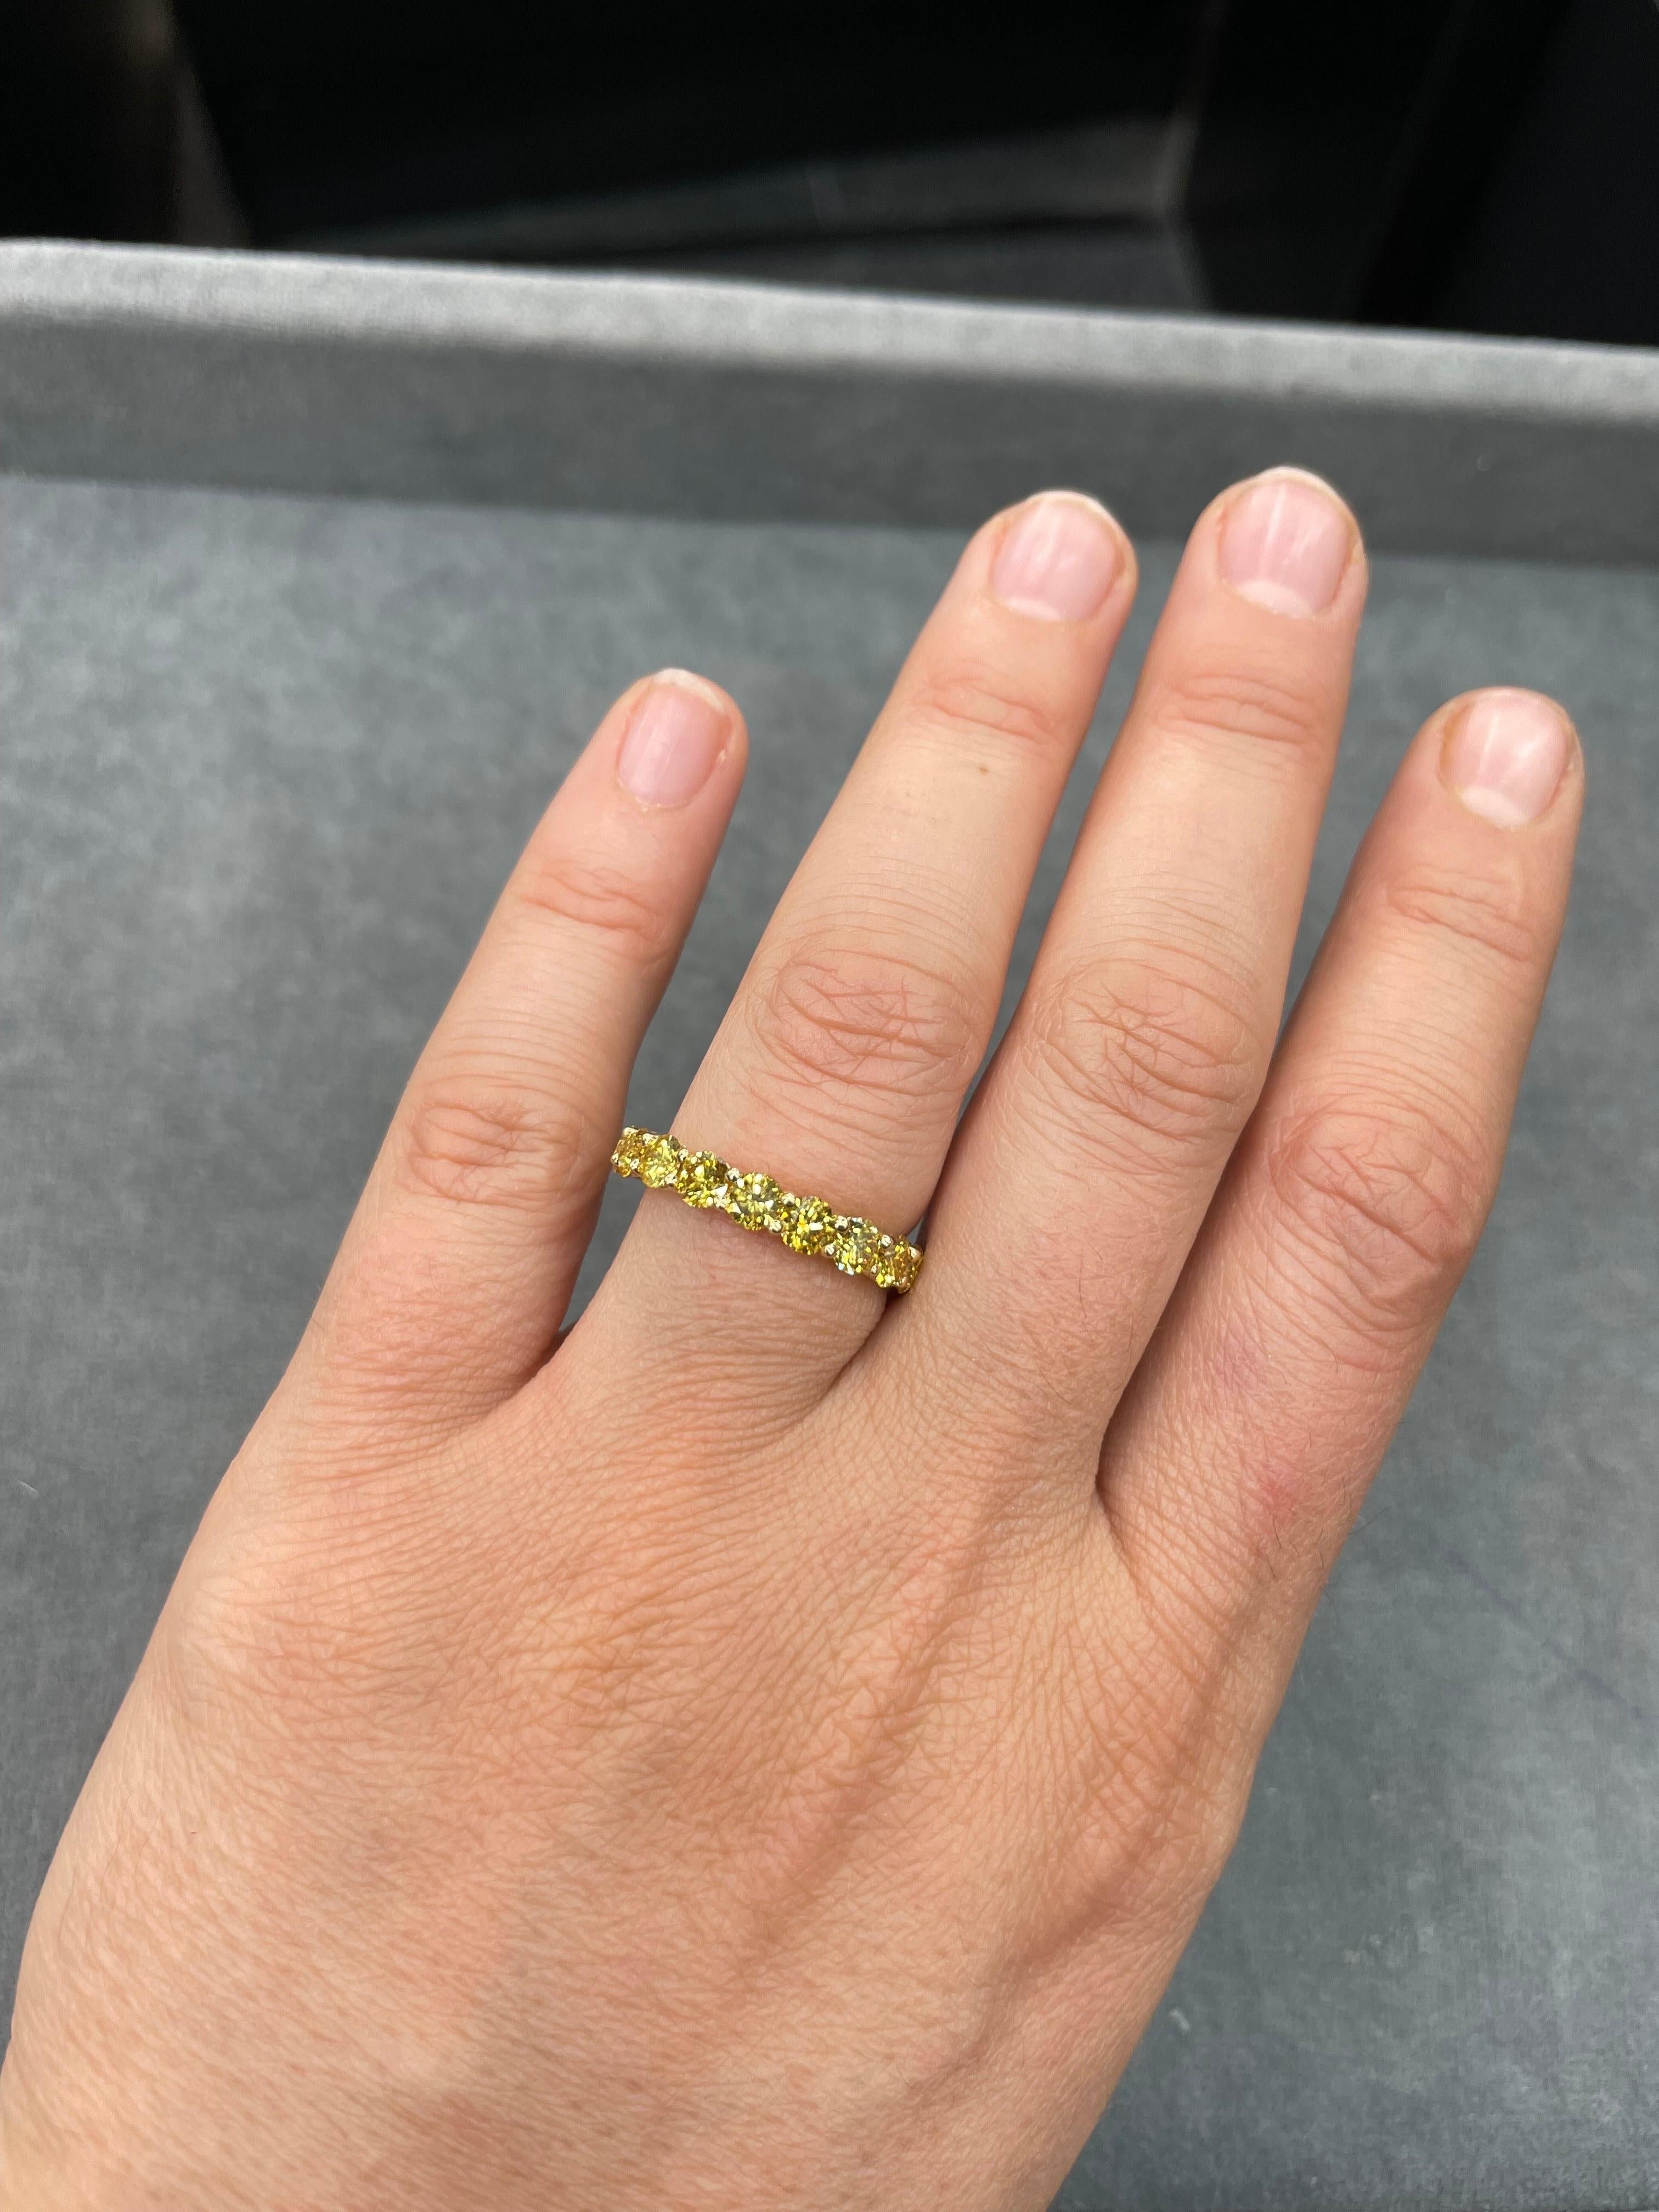 Fancy Vivid Yellow Diamond Eternity Wedding Band 3.45 Carats 18 Karat Gold In New Condition For Sale In New York, NY